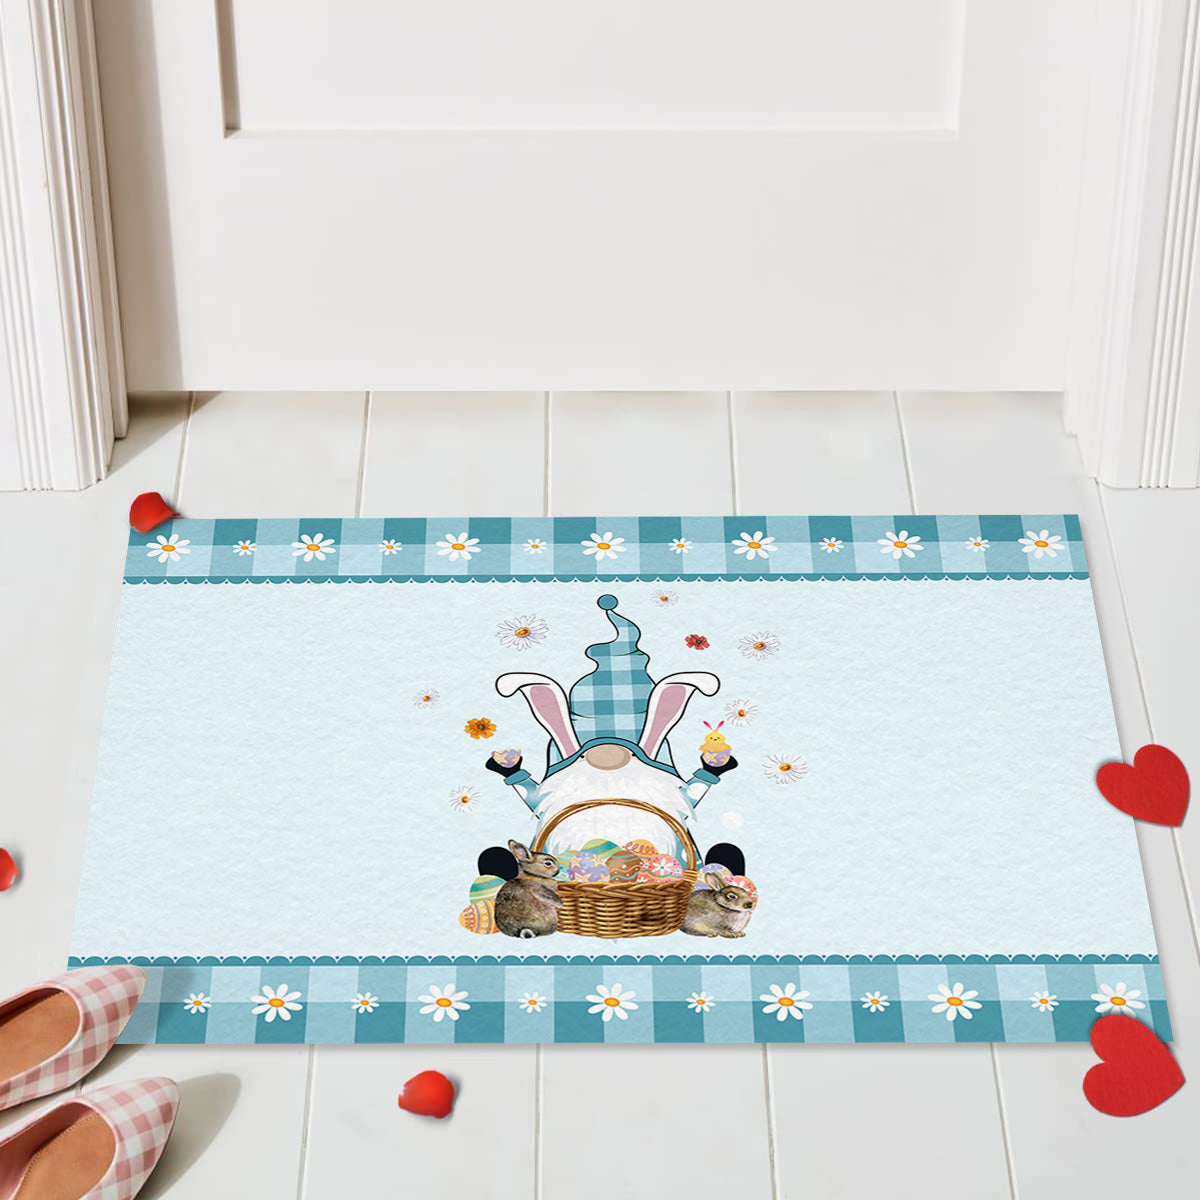 Gnome With Rabbit - Easter Themed Doormat